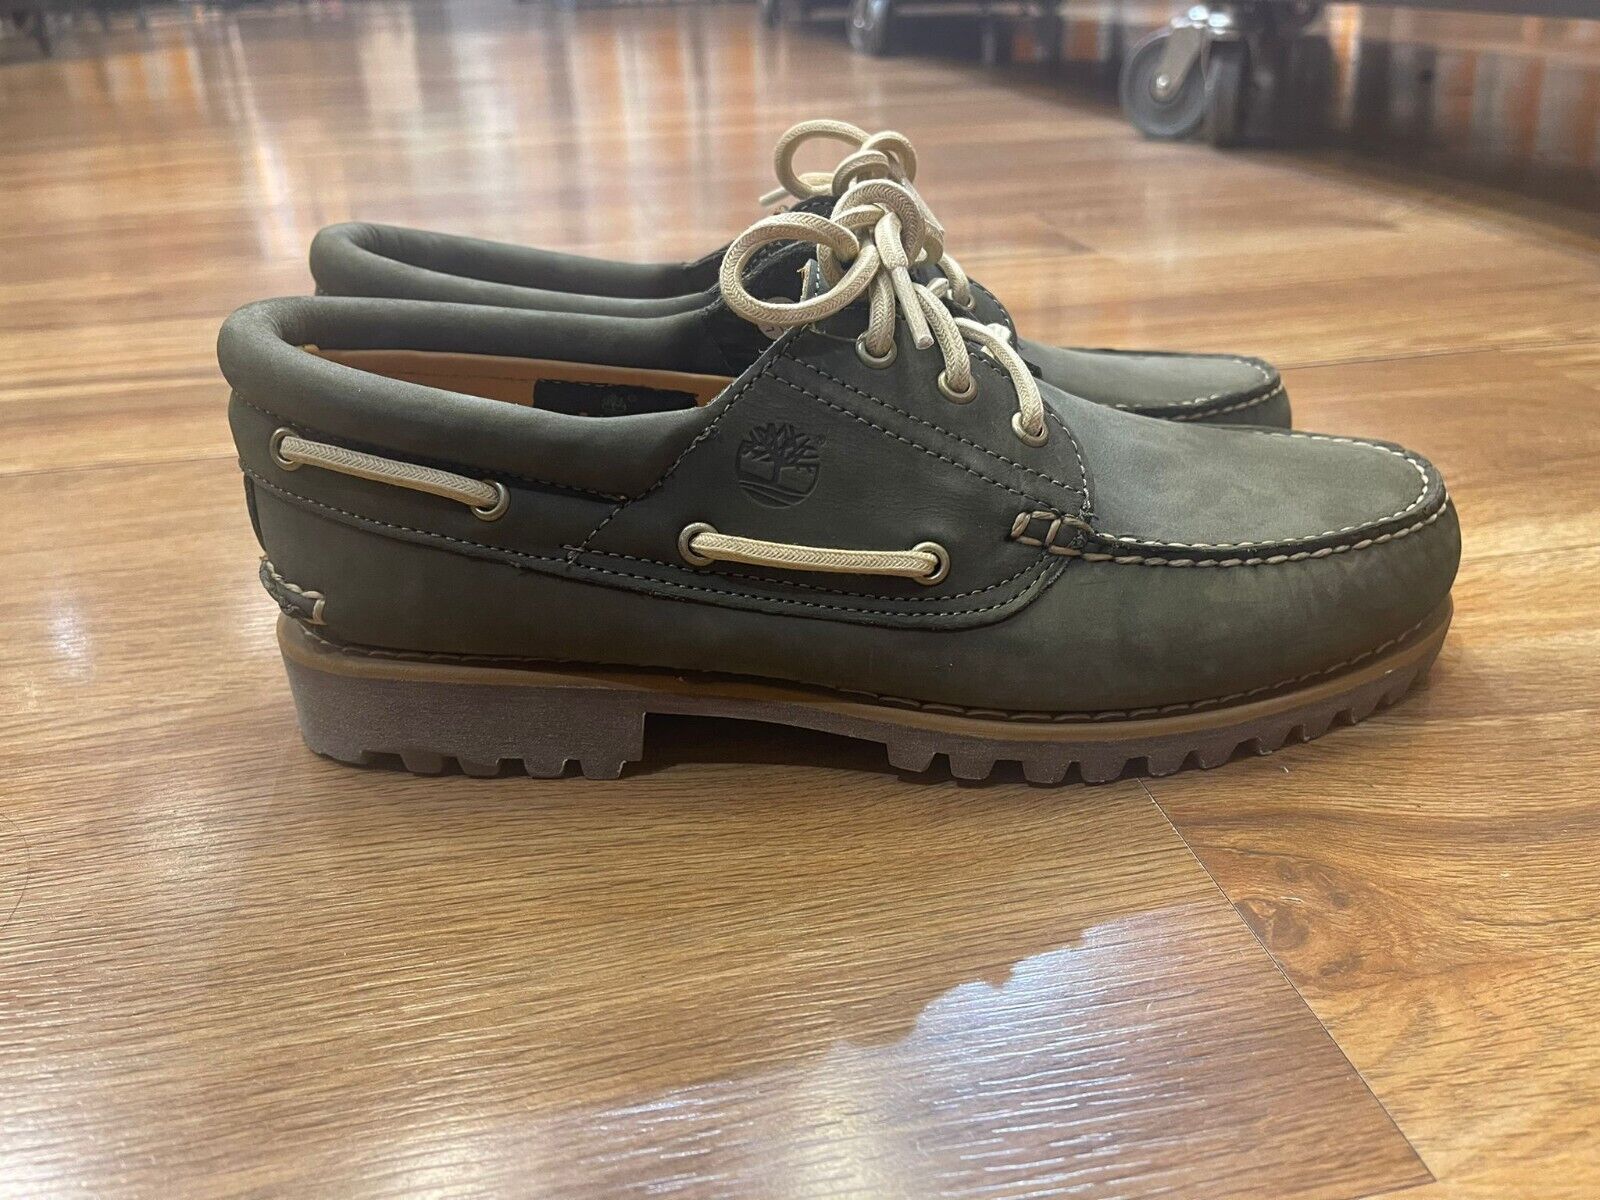 TIMBERLAND MEN'S AUTHENTIC HANDSEWN BOAT SHOE DARK GREEN NUBUCK A5WAD ALL SIZES - $174.99